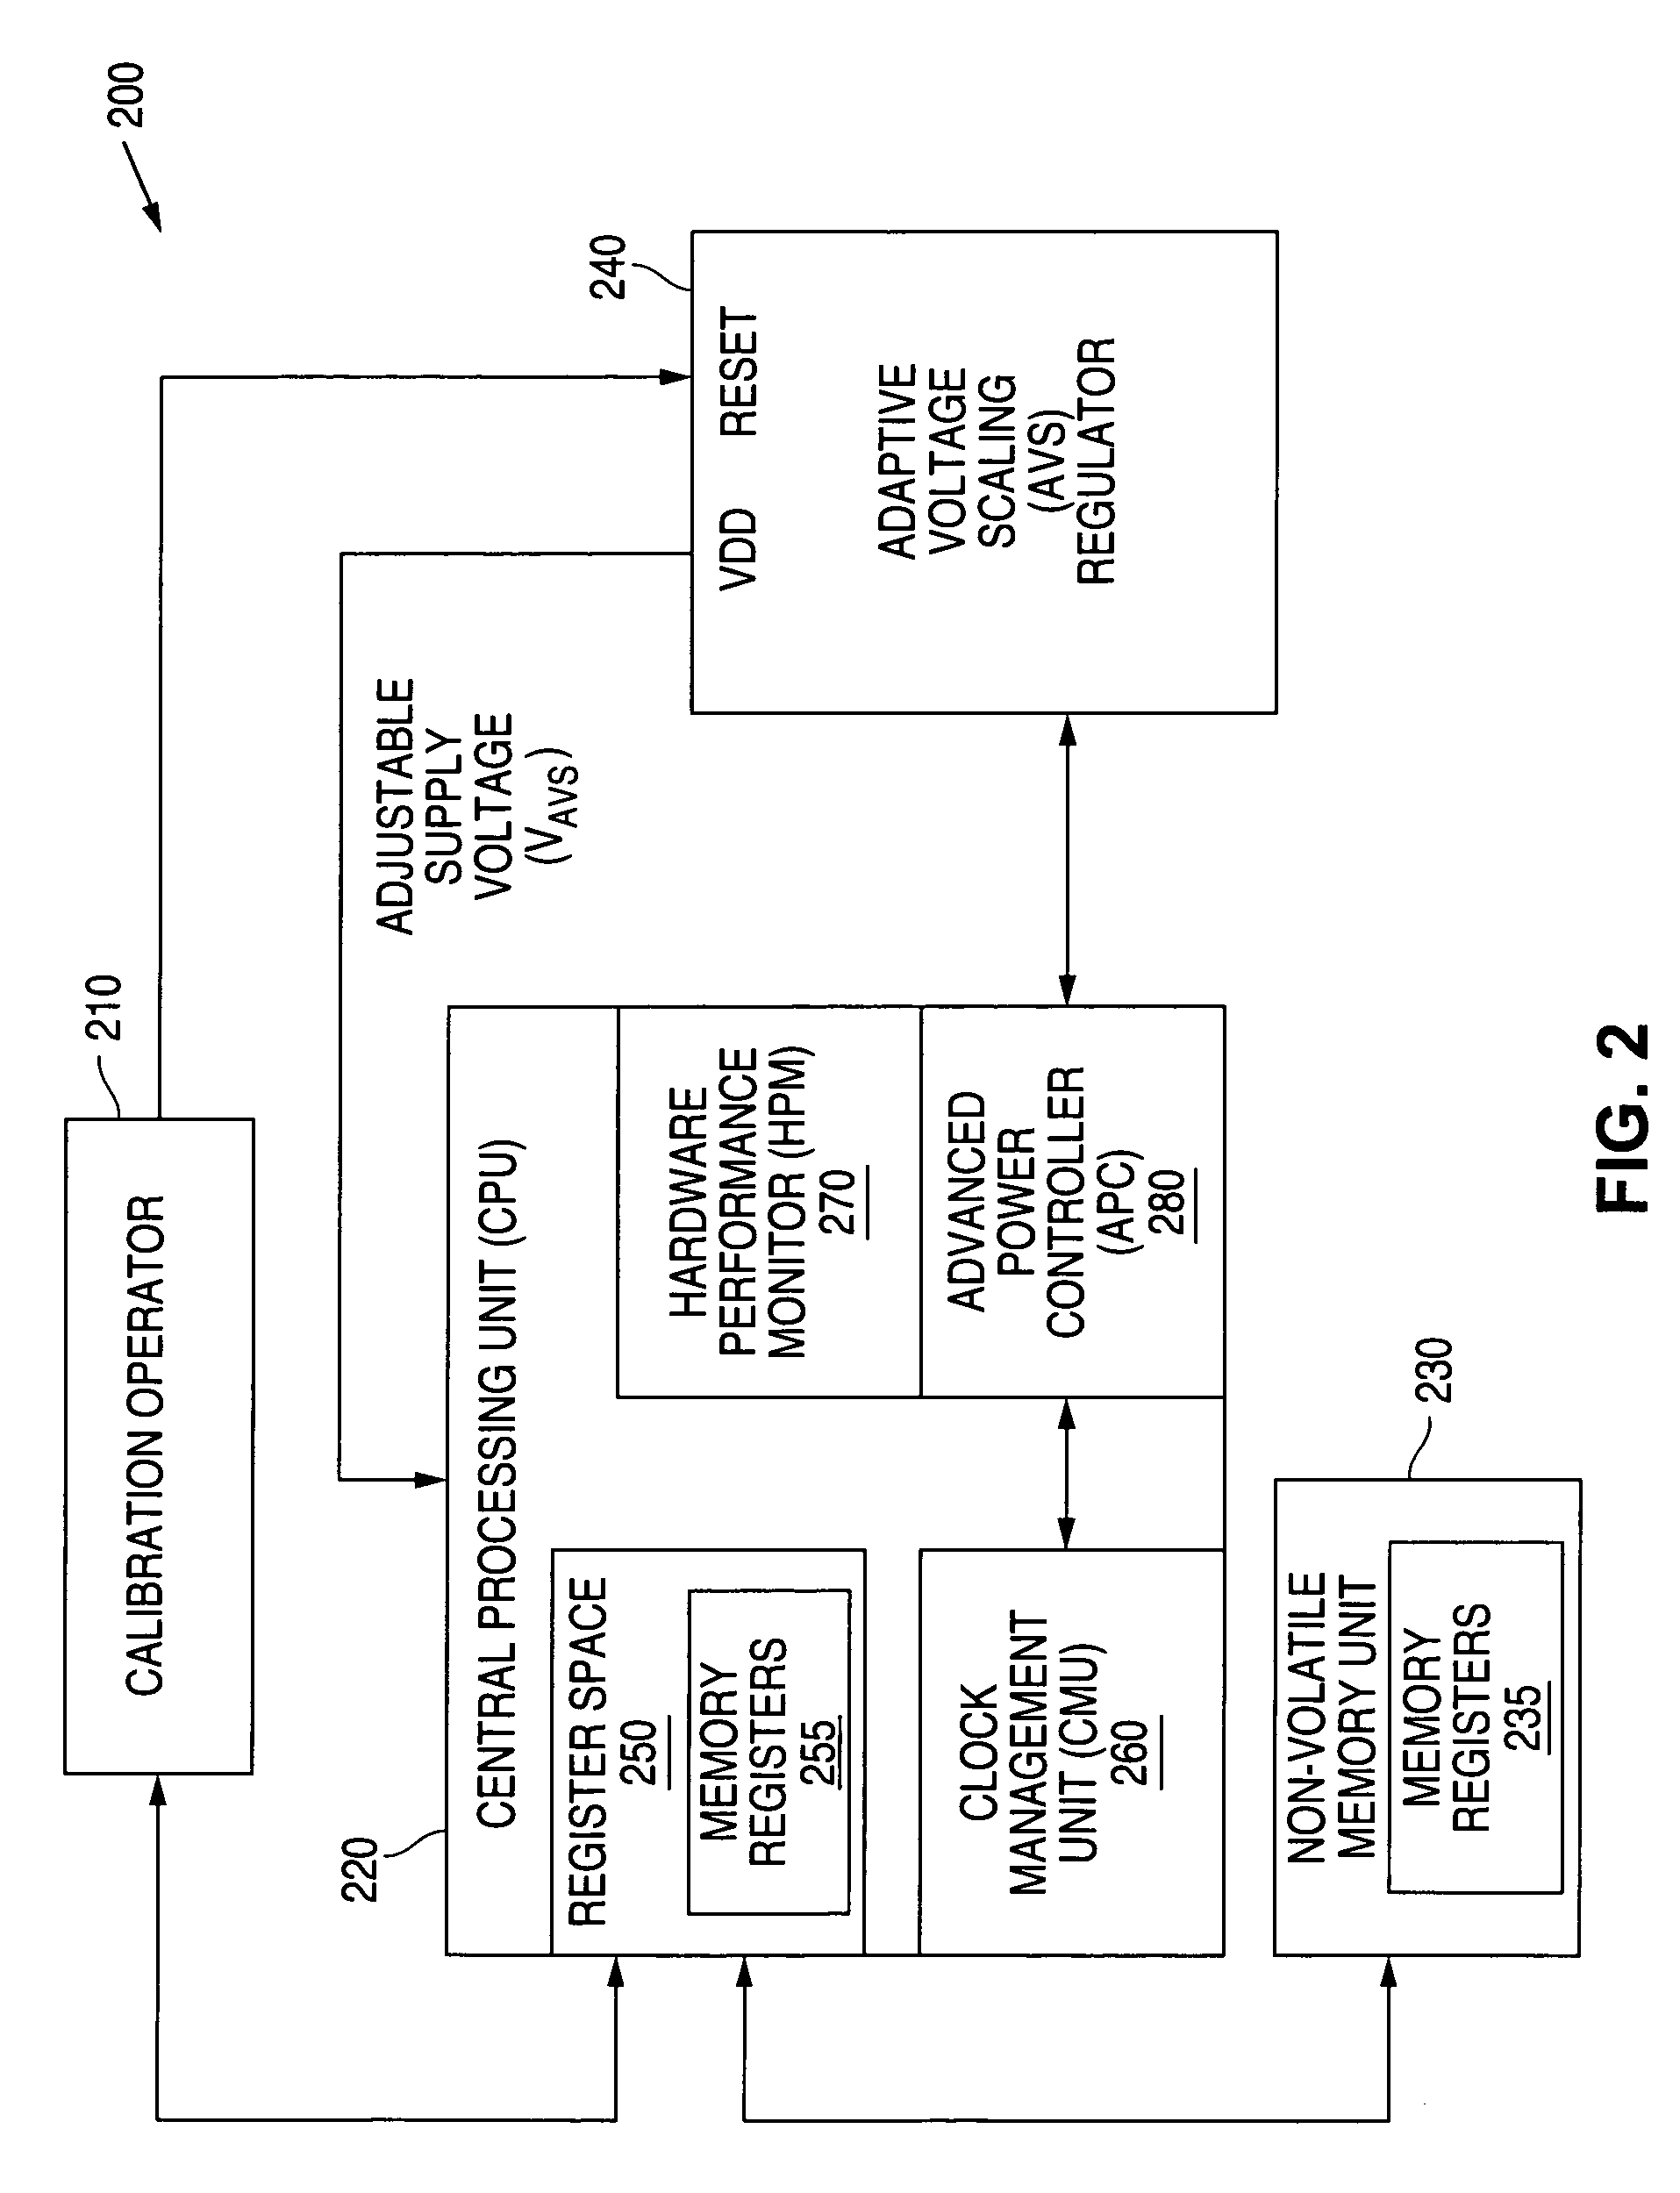 System and method for providing multi-point calibration of an adaptive voltage scaling system